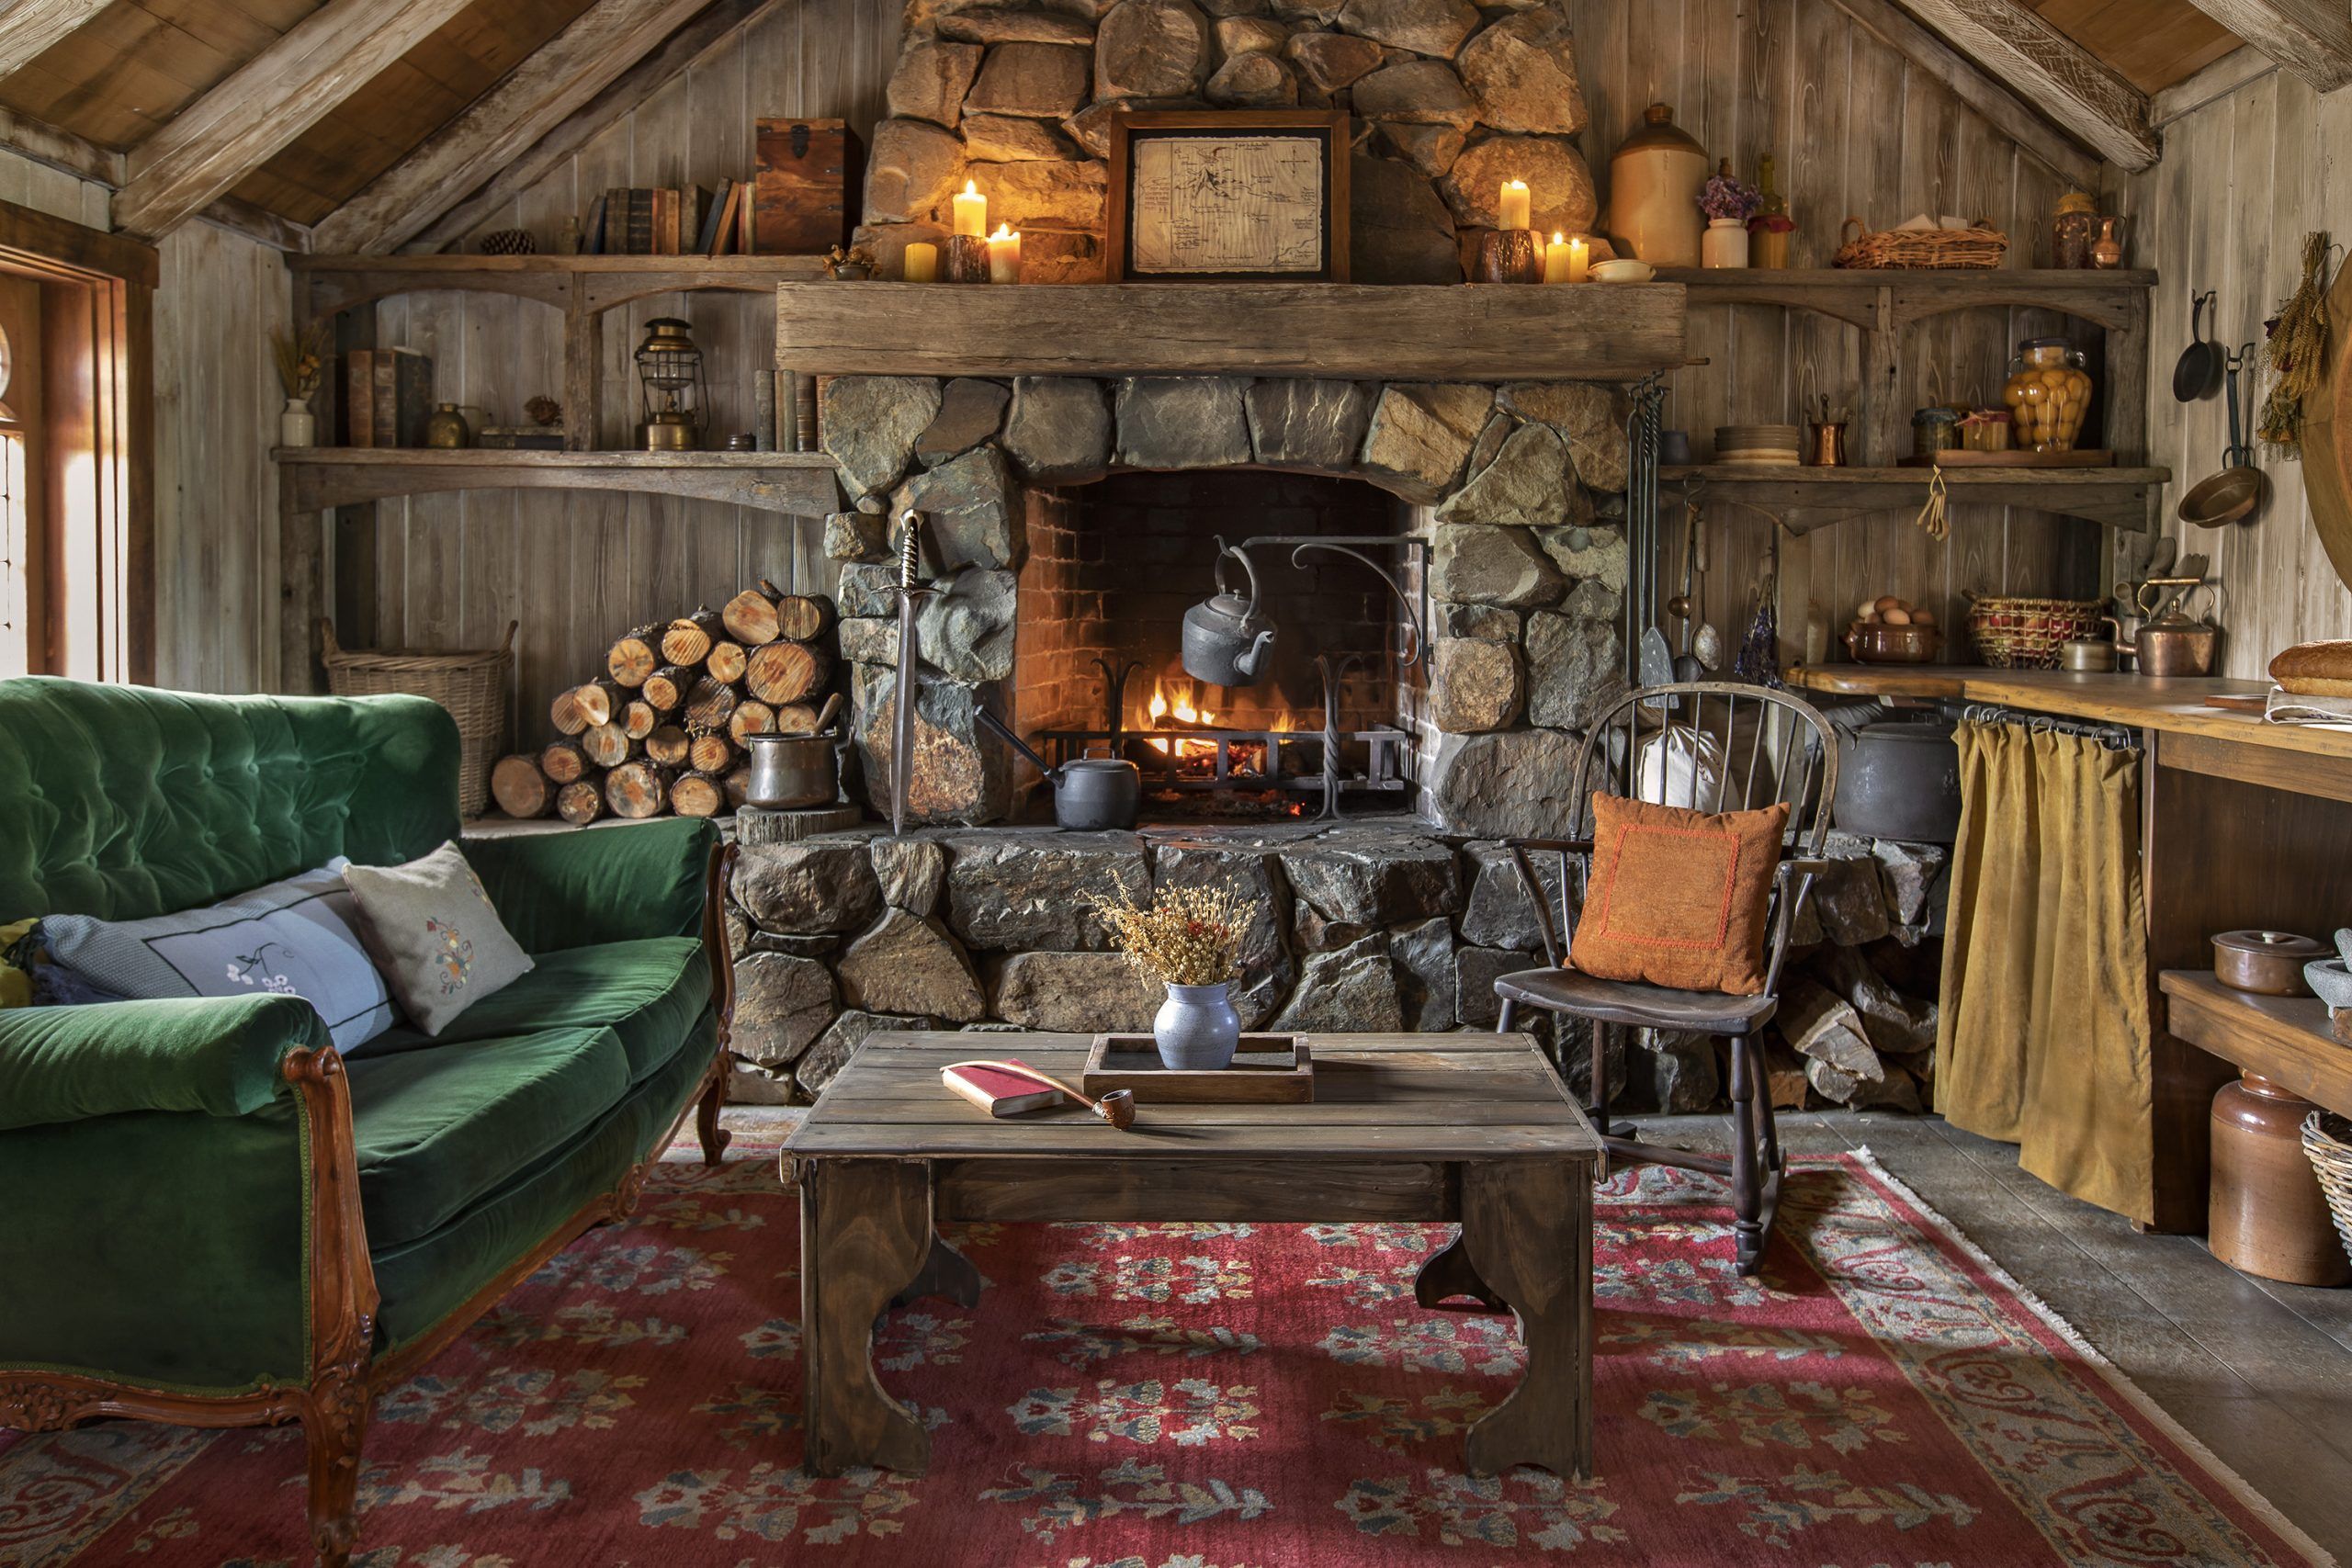 Guide A Keep At The Official ‘The Hobbit’ Set By way of Airbnb